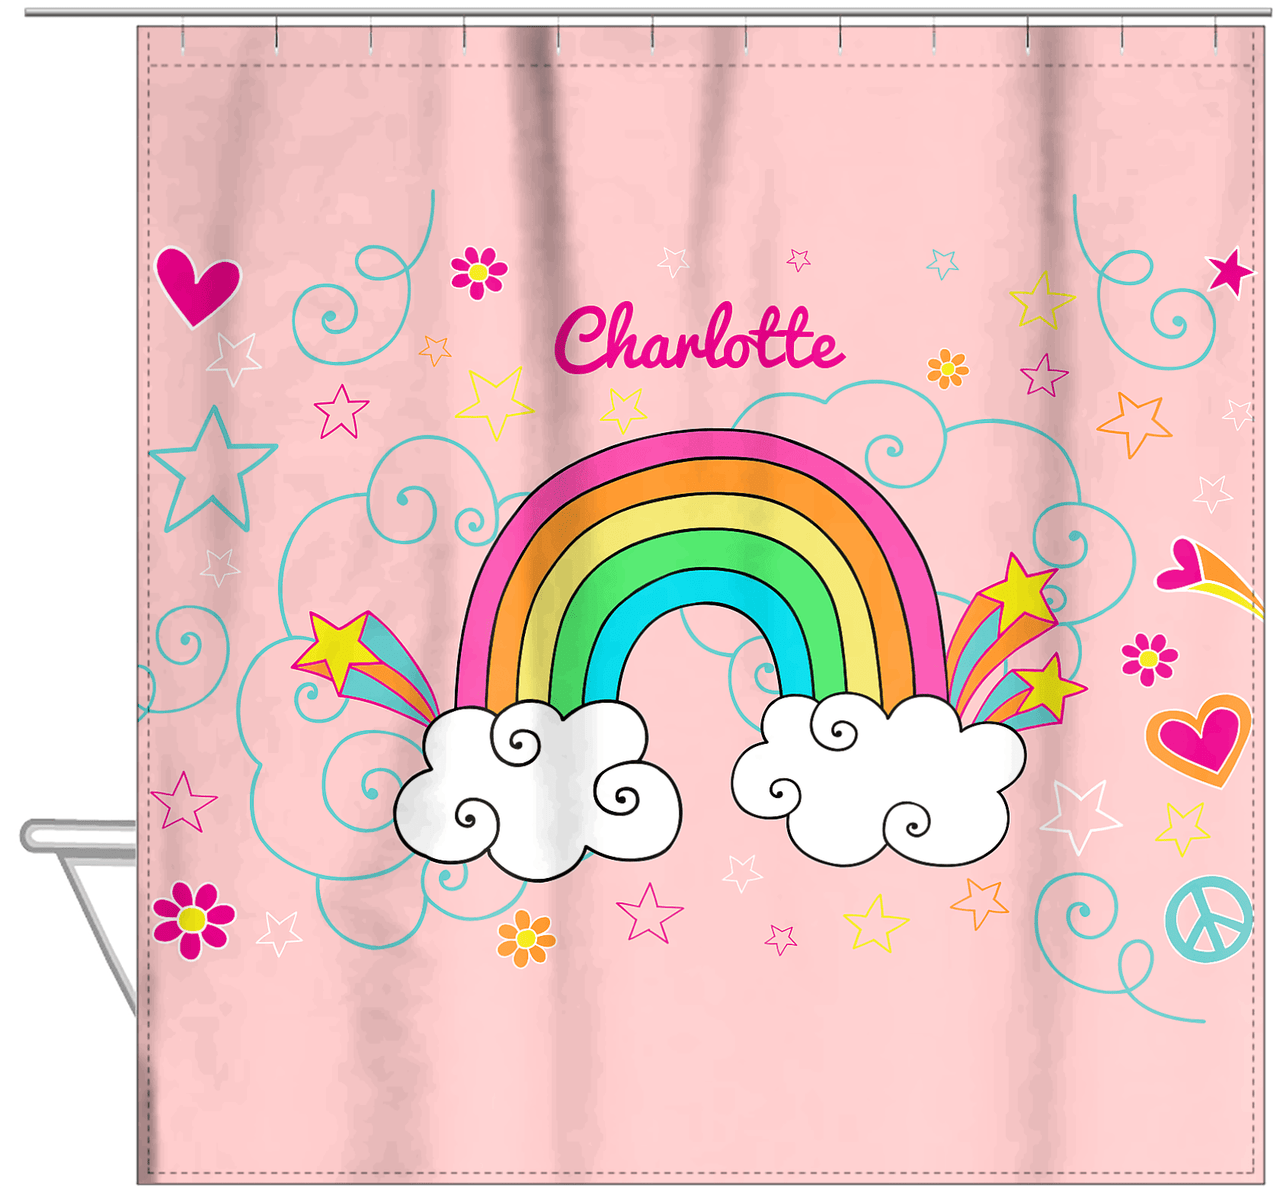 Personalized Rainbows Shower Curtain VI - Rainbow Doodle - Pink Background - Hanging View